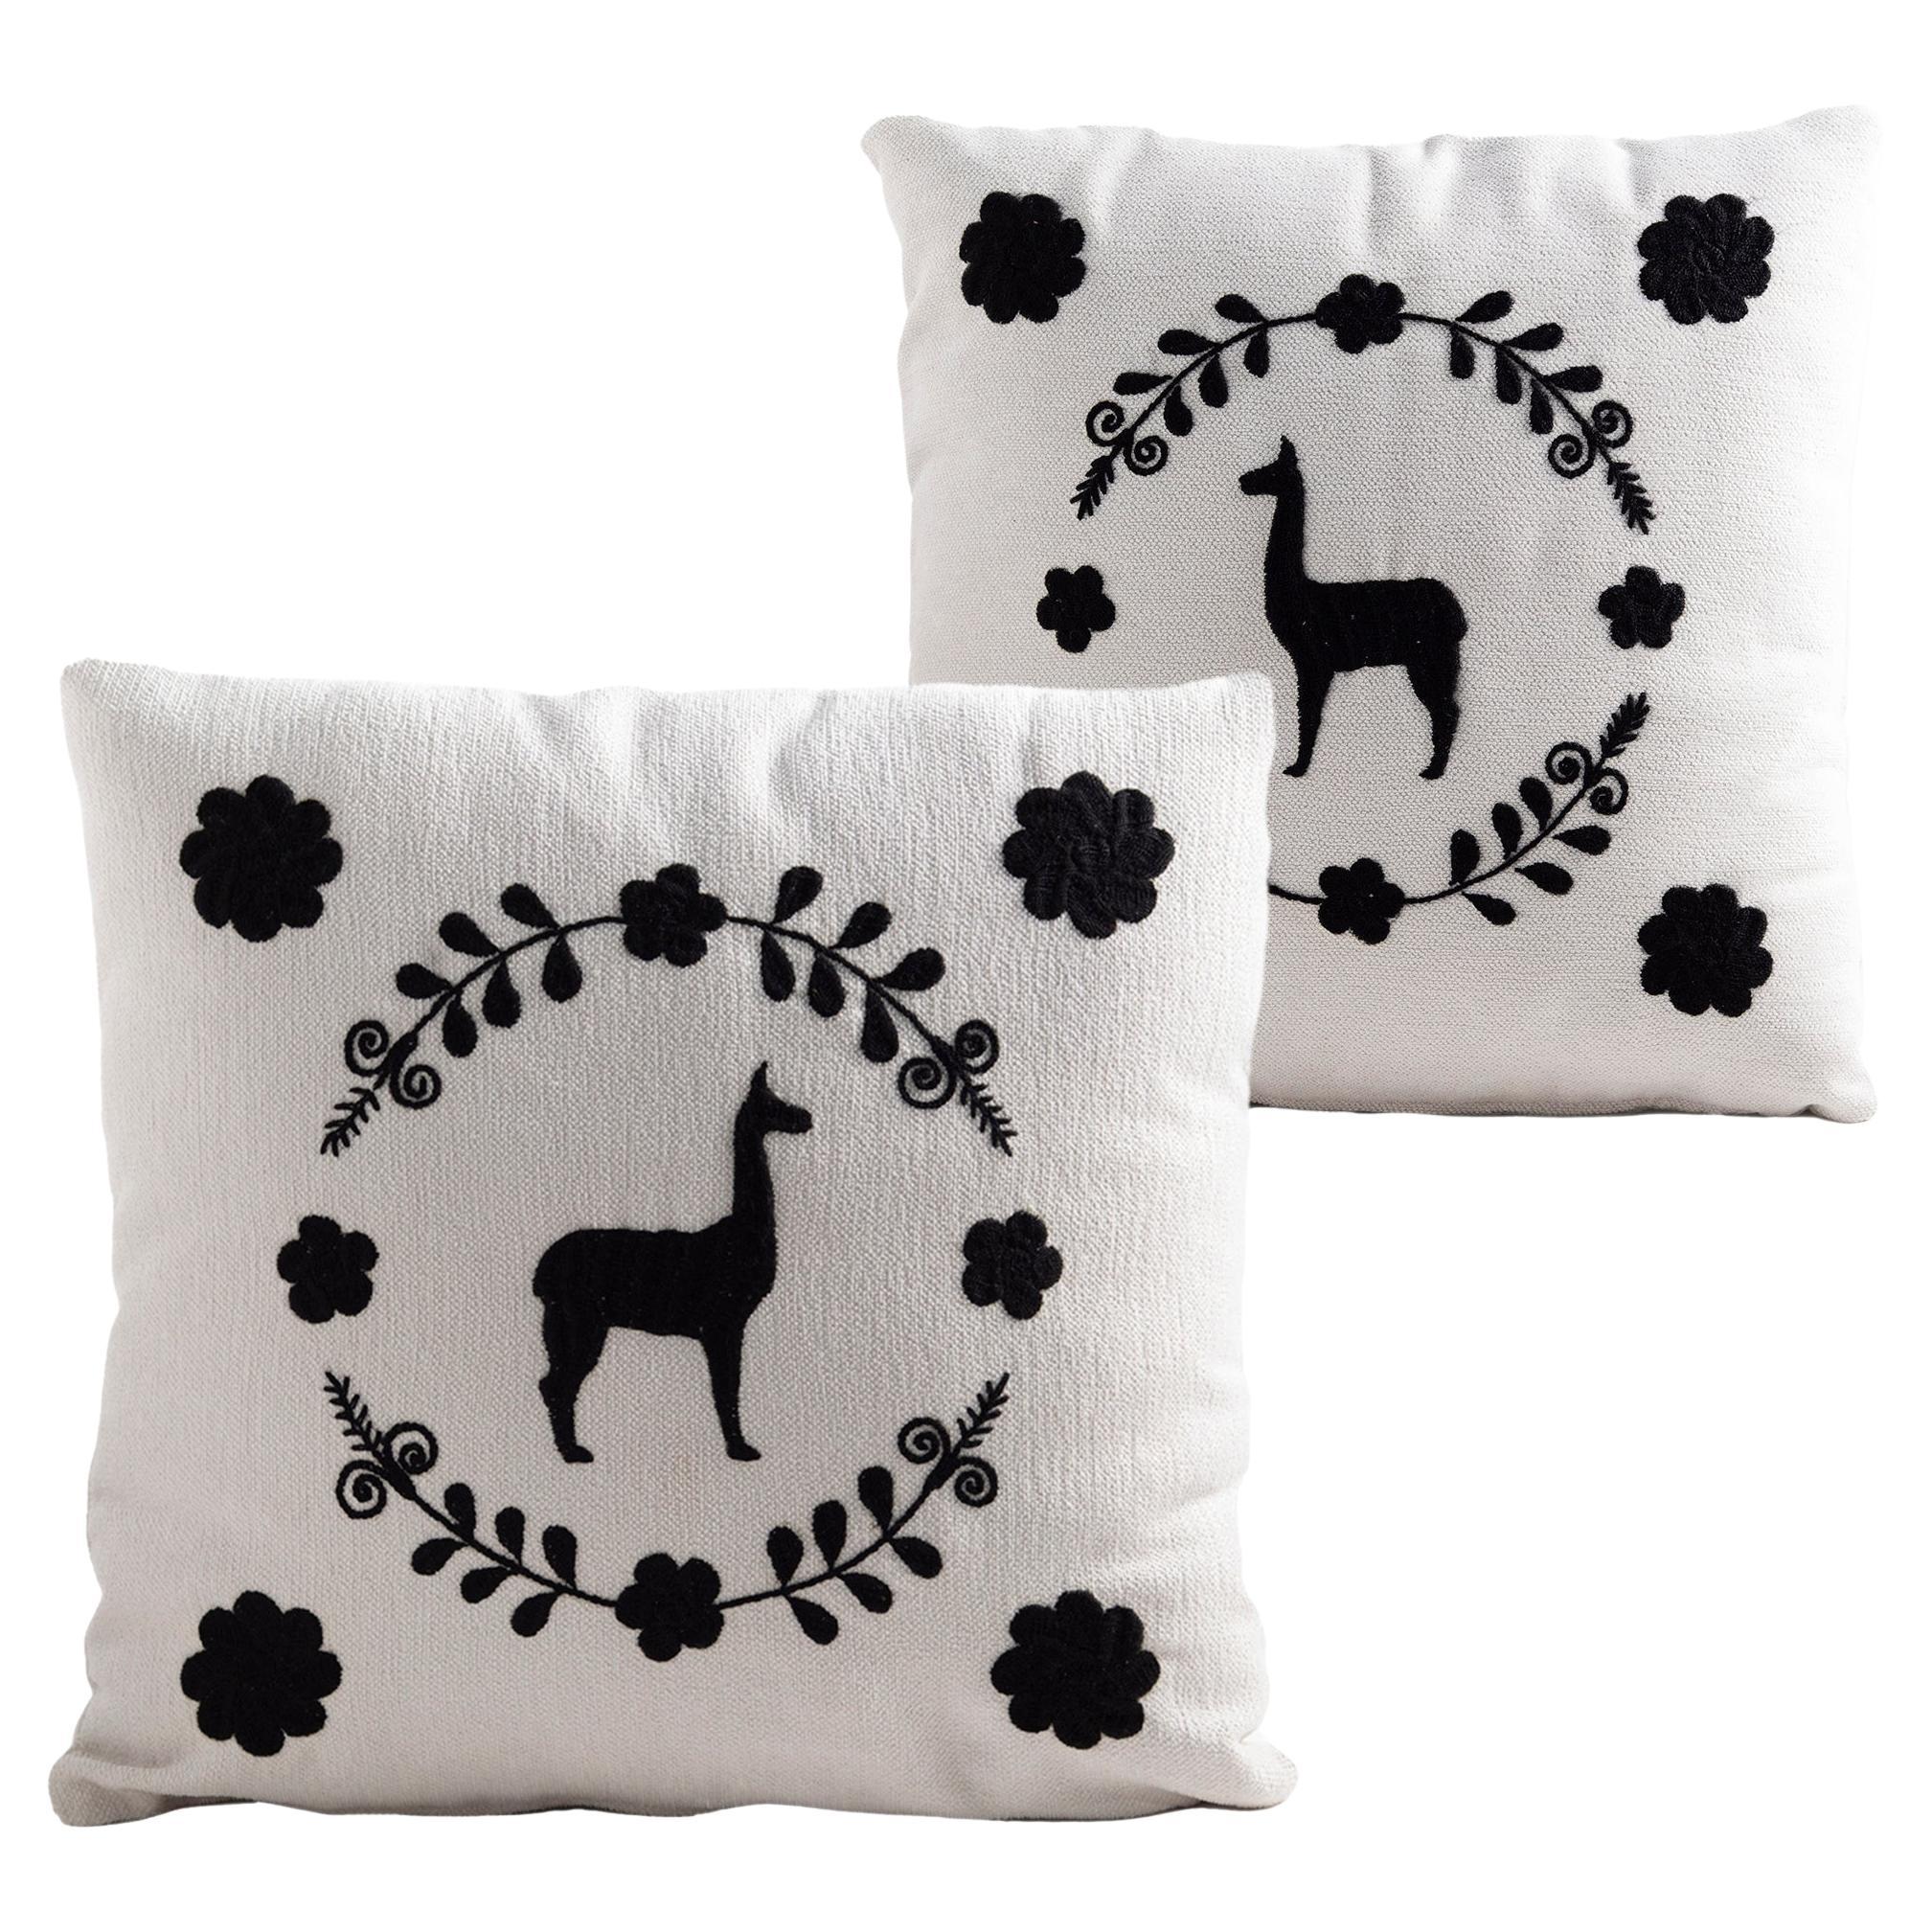 LLAMA Hand Embroidered Decorative Pillows Ivory Upholstery by ANDEAN, Set of 2 For Sale